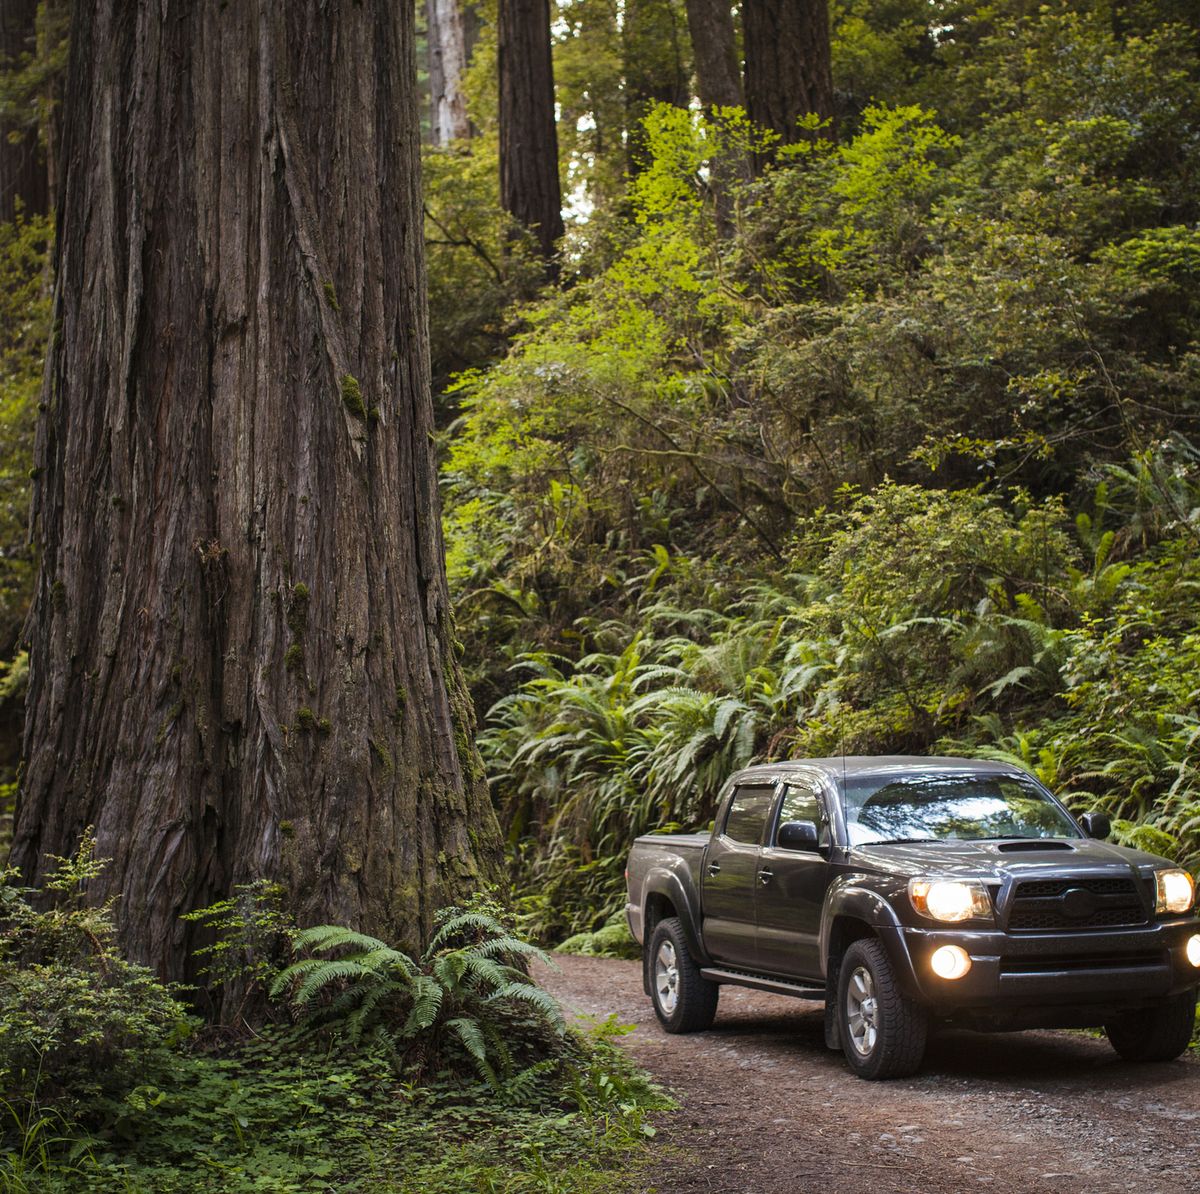 https://hips.hearstapps.com/hmg-prod/images/pick-up-truck-on-dirt-road-amidst-forest-at-redwood-royalty-free-image-1591709073.jpg?crop=0.670xw:1.00xh;0.218xw,0&resize=1200:*